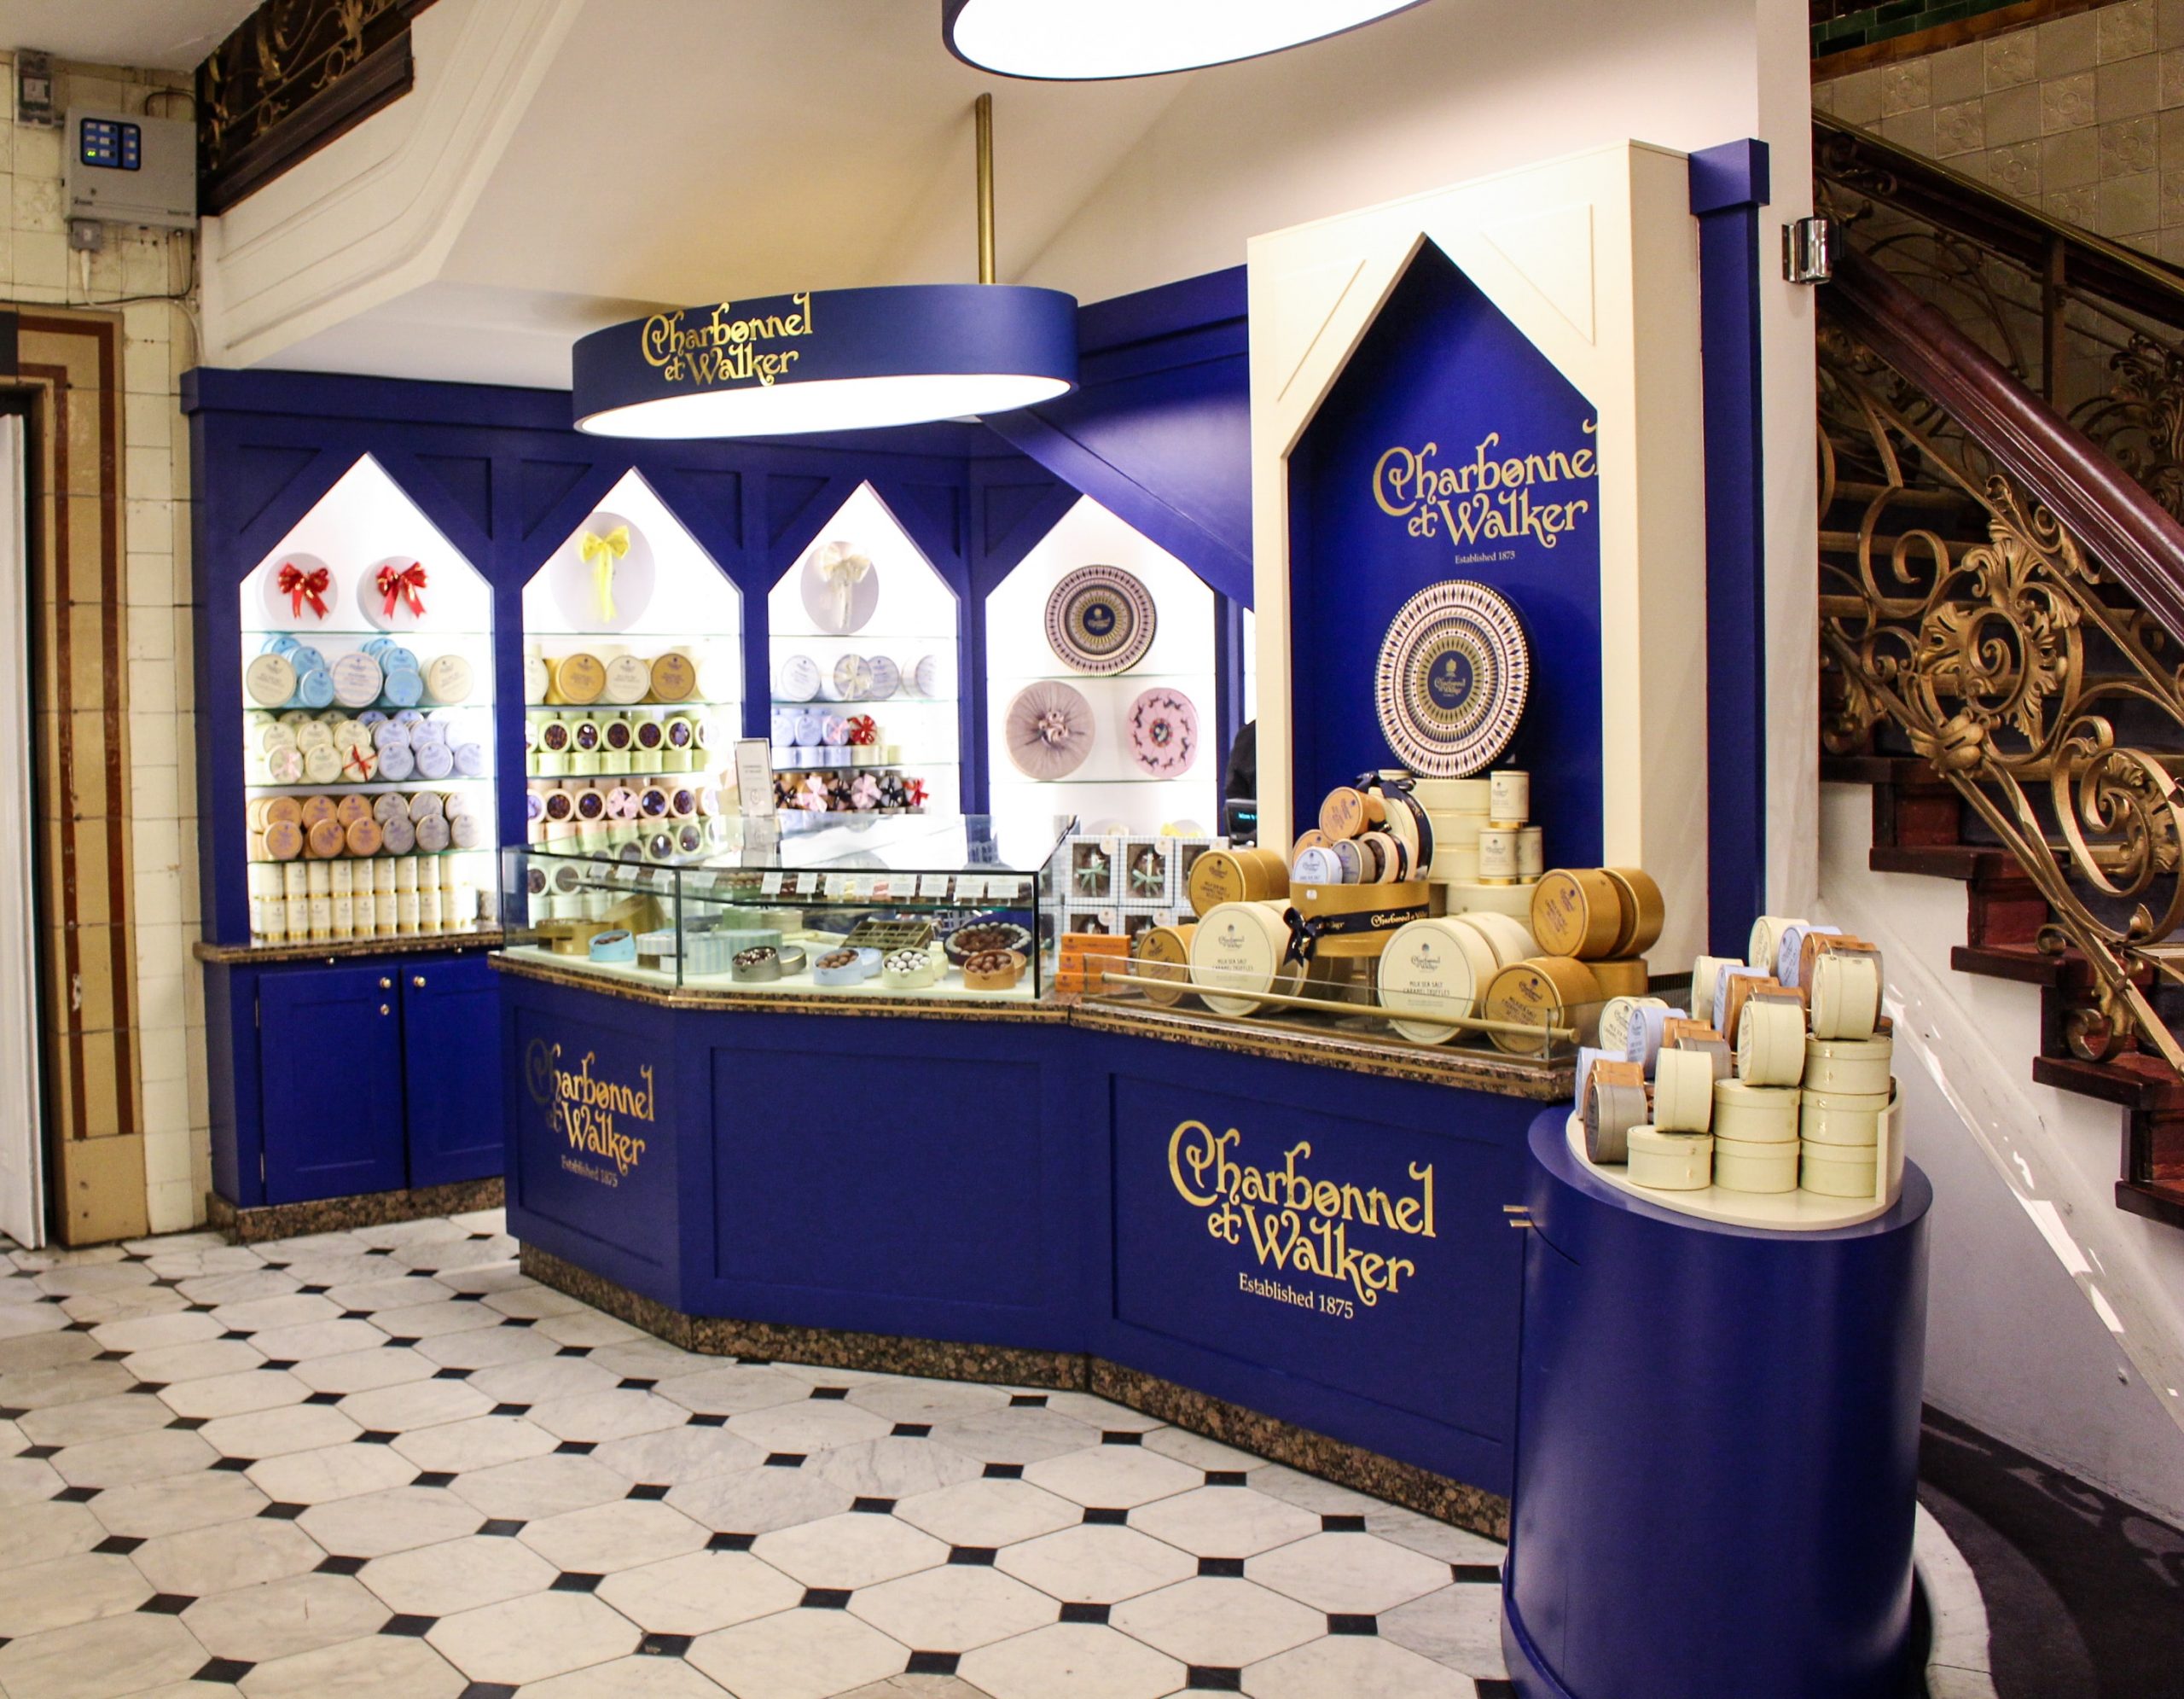 Founded in 1875, Charbonnel et Walker is one of Britain’s earliest chocolatiers - Address: 87-135 Brompton Rd